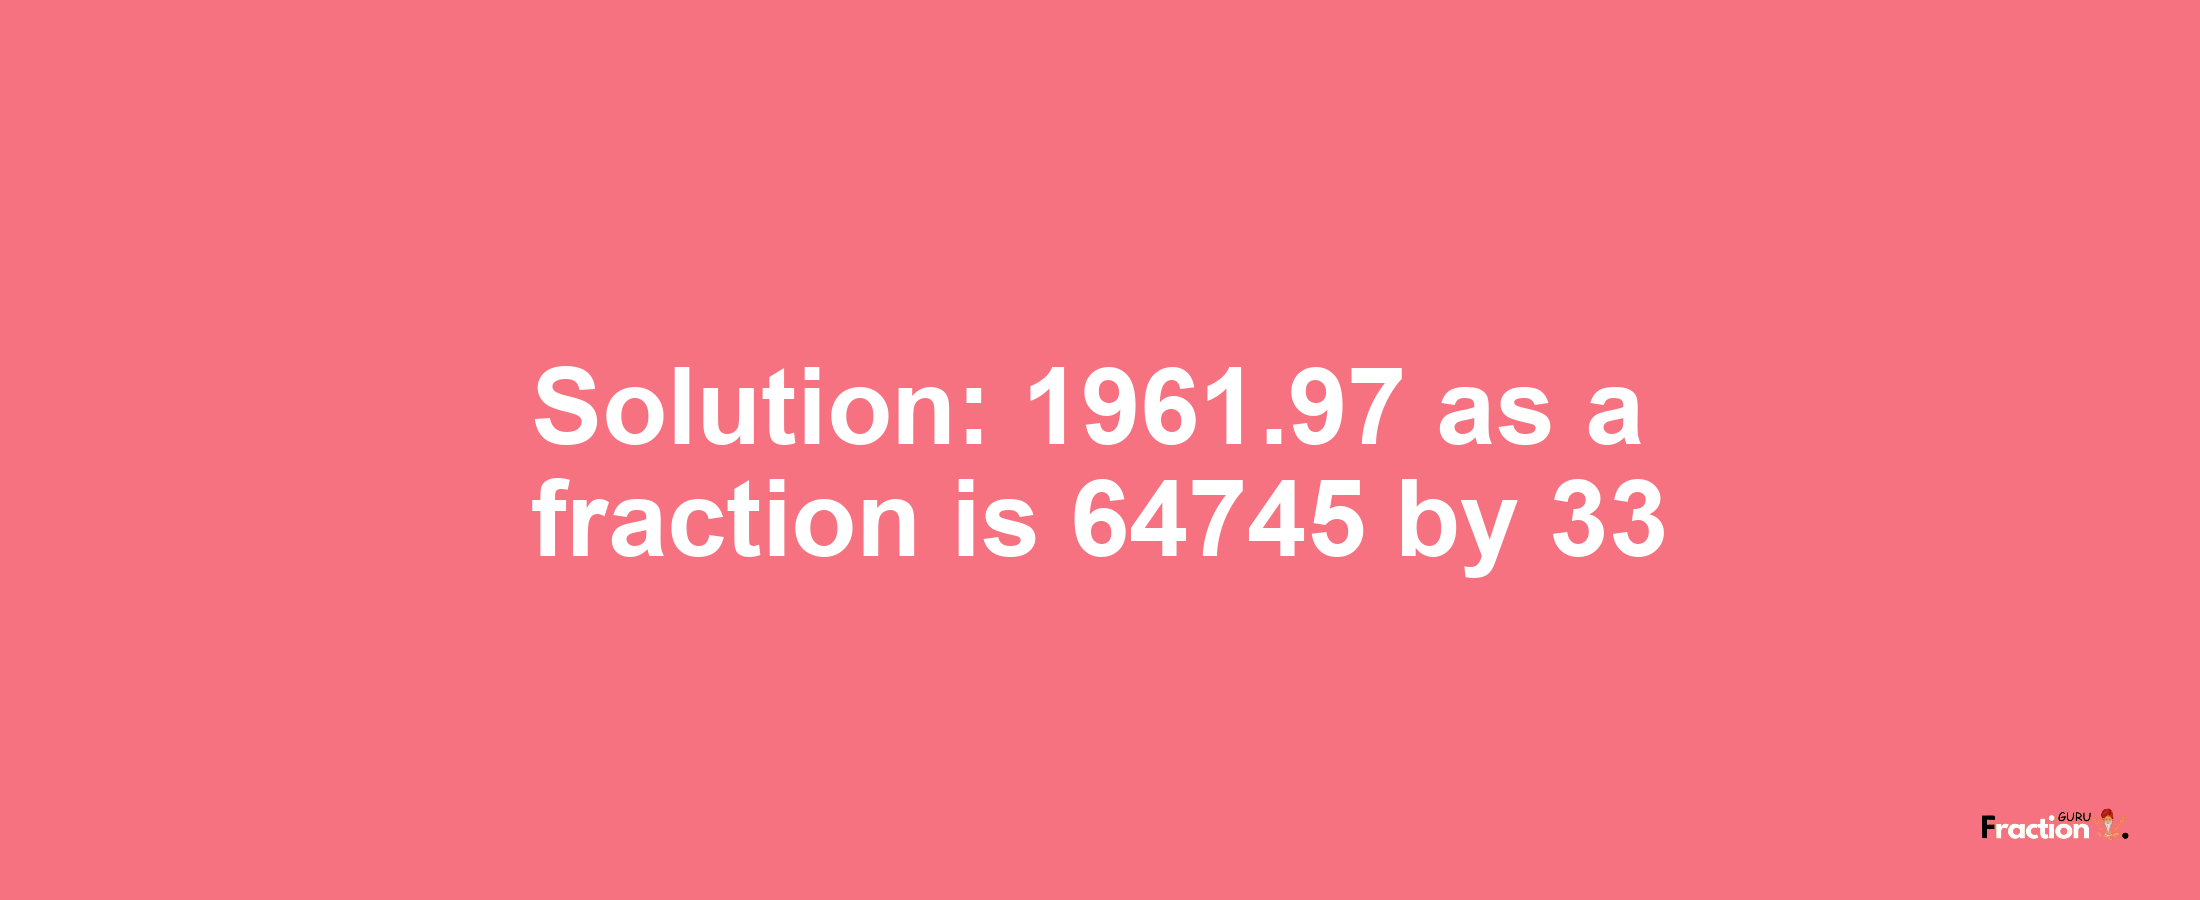 Solution:1961.97 as a fraction is 64745/33